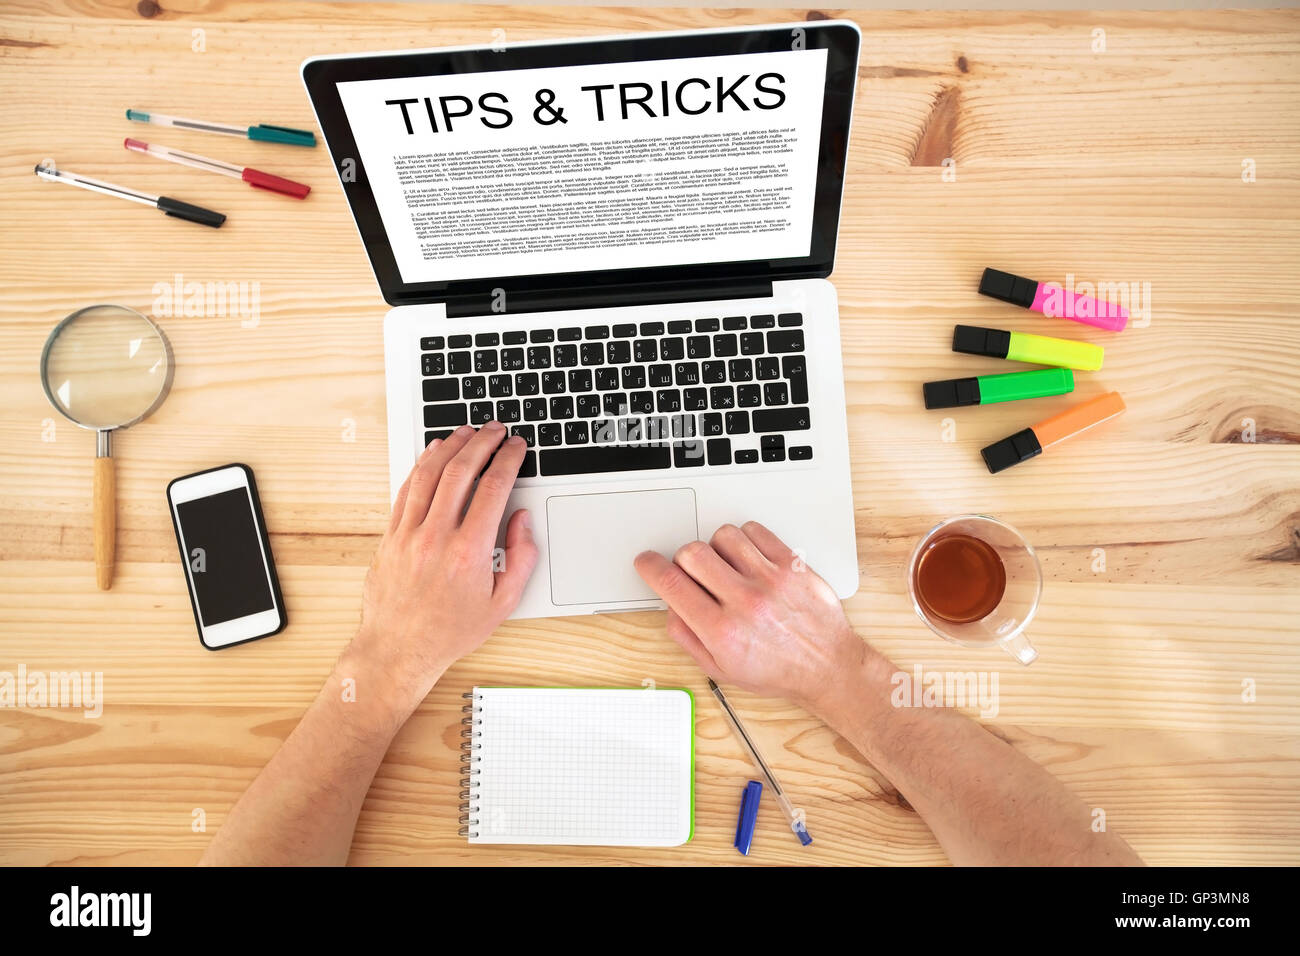 tips and tricks Stock Photo